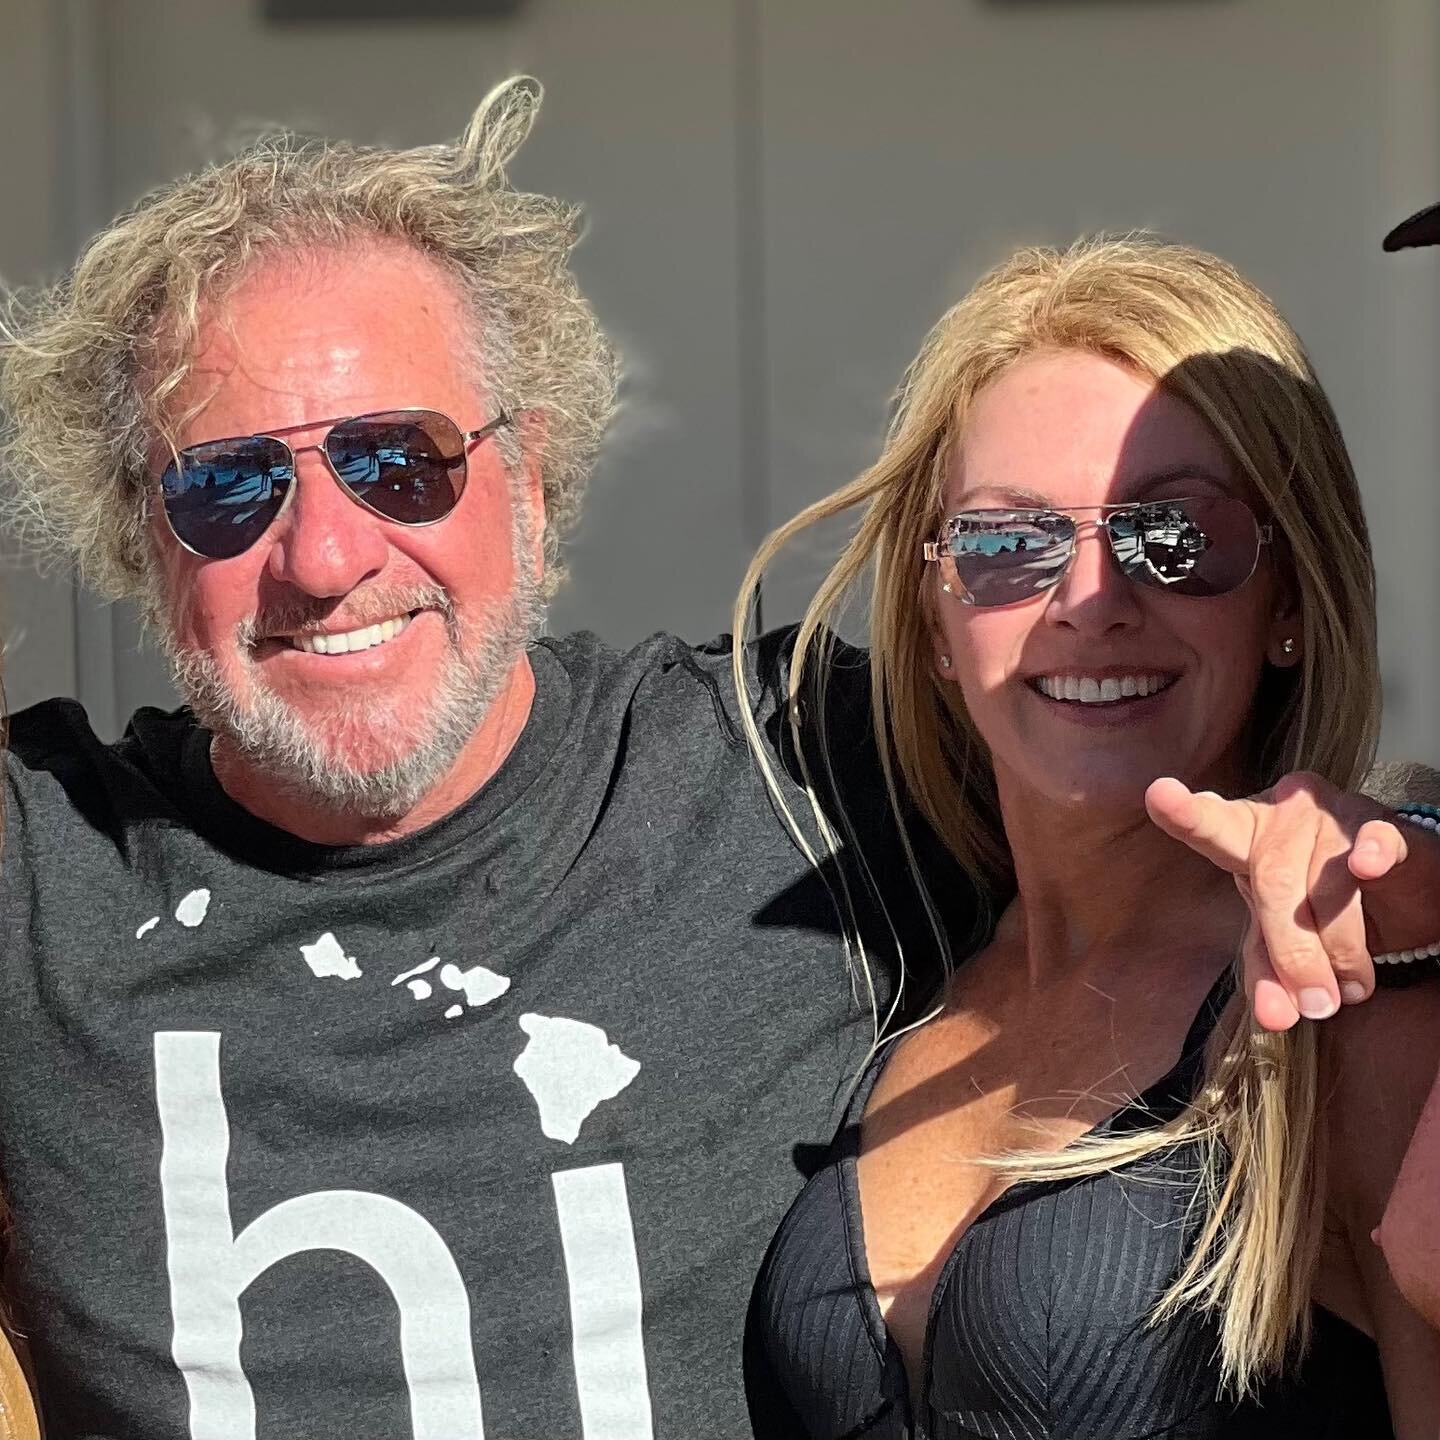 HAPPY HALLOWEEN!! No costumes or trickery involved here just a throw back to this August...hanging out at the pool in Vegas and up walks none other than the real &quot;Red Rocker&quot; Sammy Hagar!! VEGAS BABY! 🤘#sammyhagar #rockmusic #redrocker #la